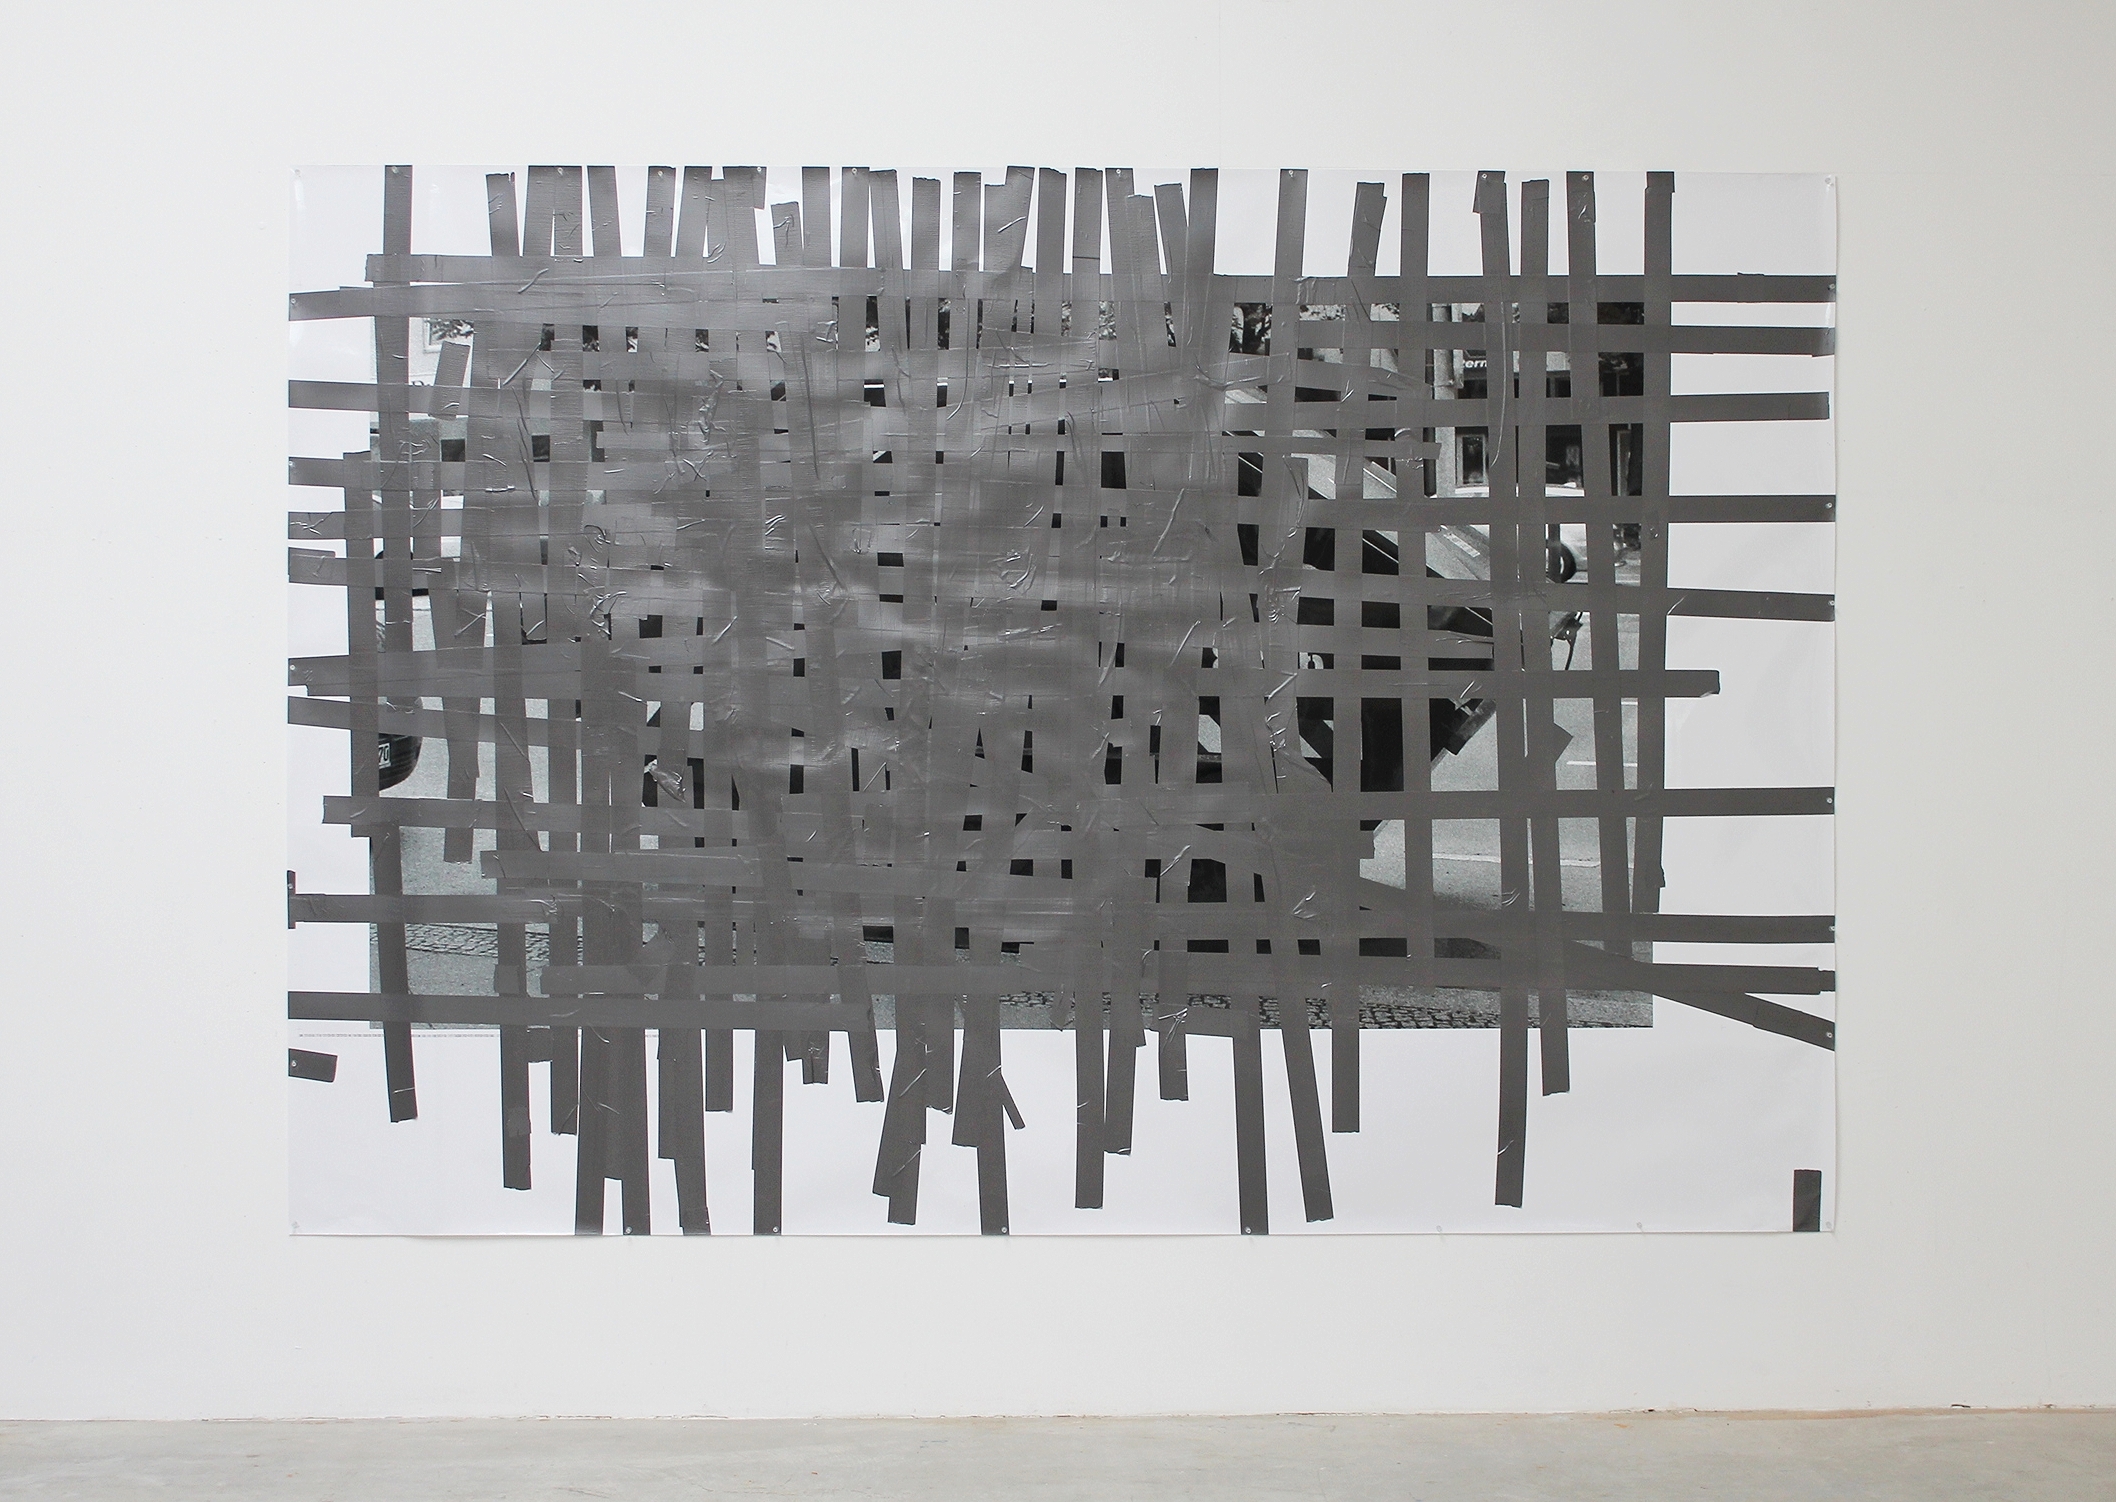  Tape Drawing (Berlin #2) 2013 72 x 104.25 inches 